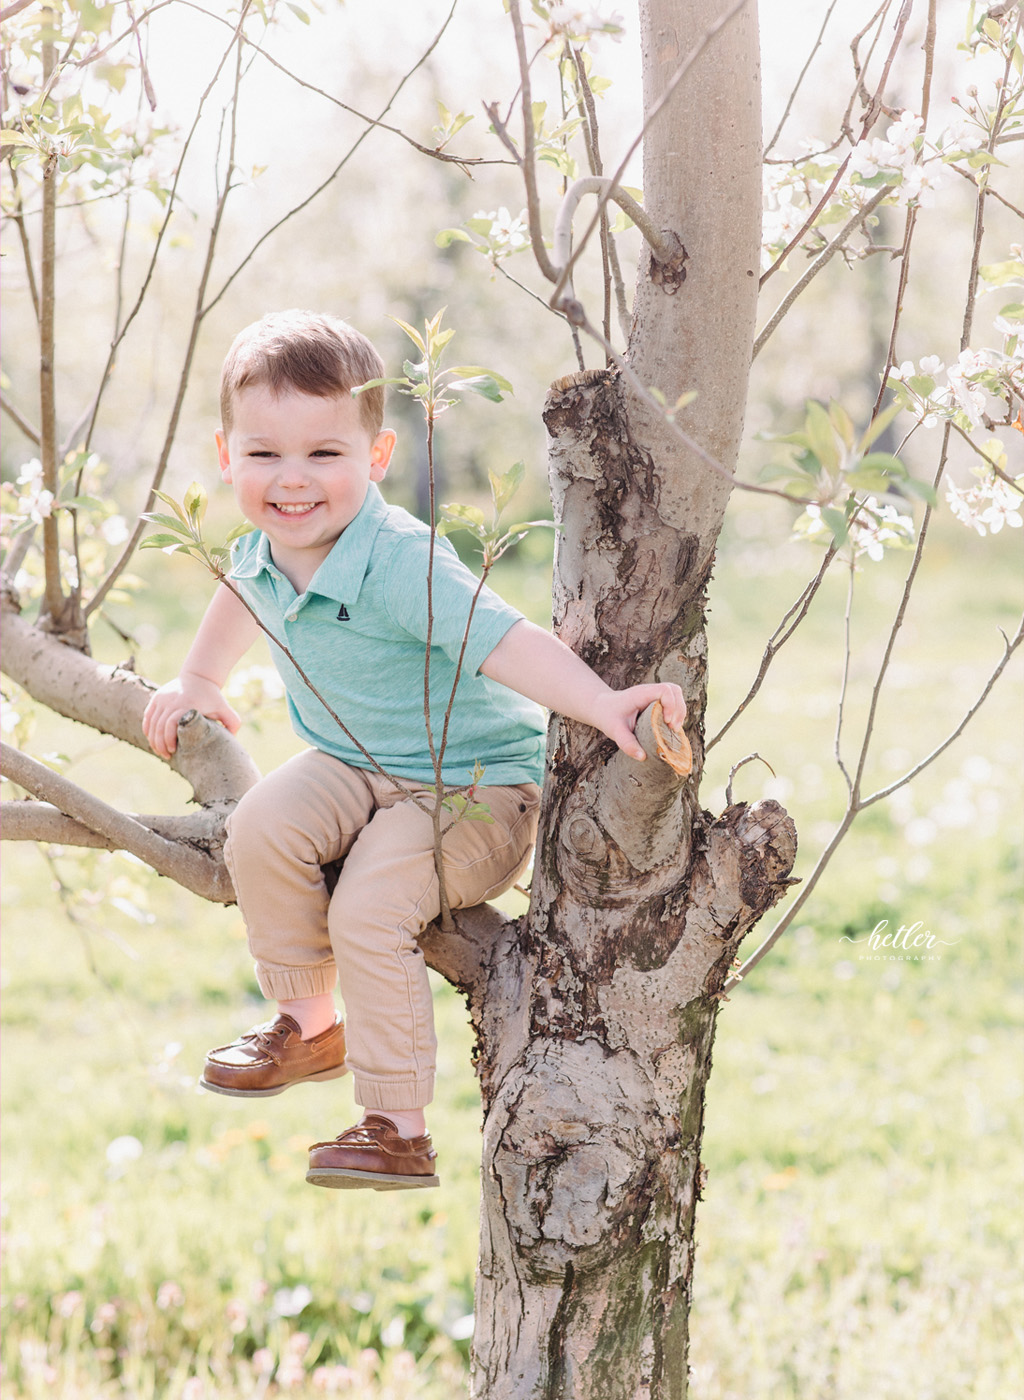 Grand Rapids Michigan children session at an orchard full of apple blossoms